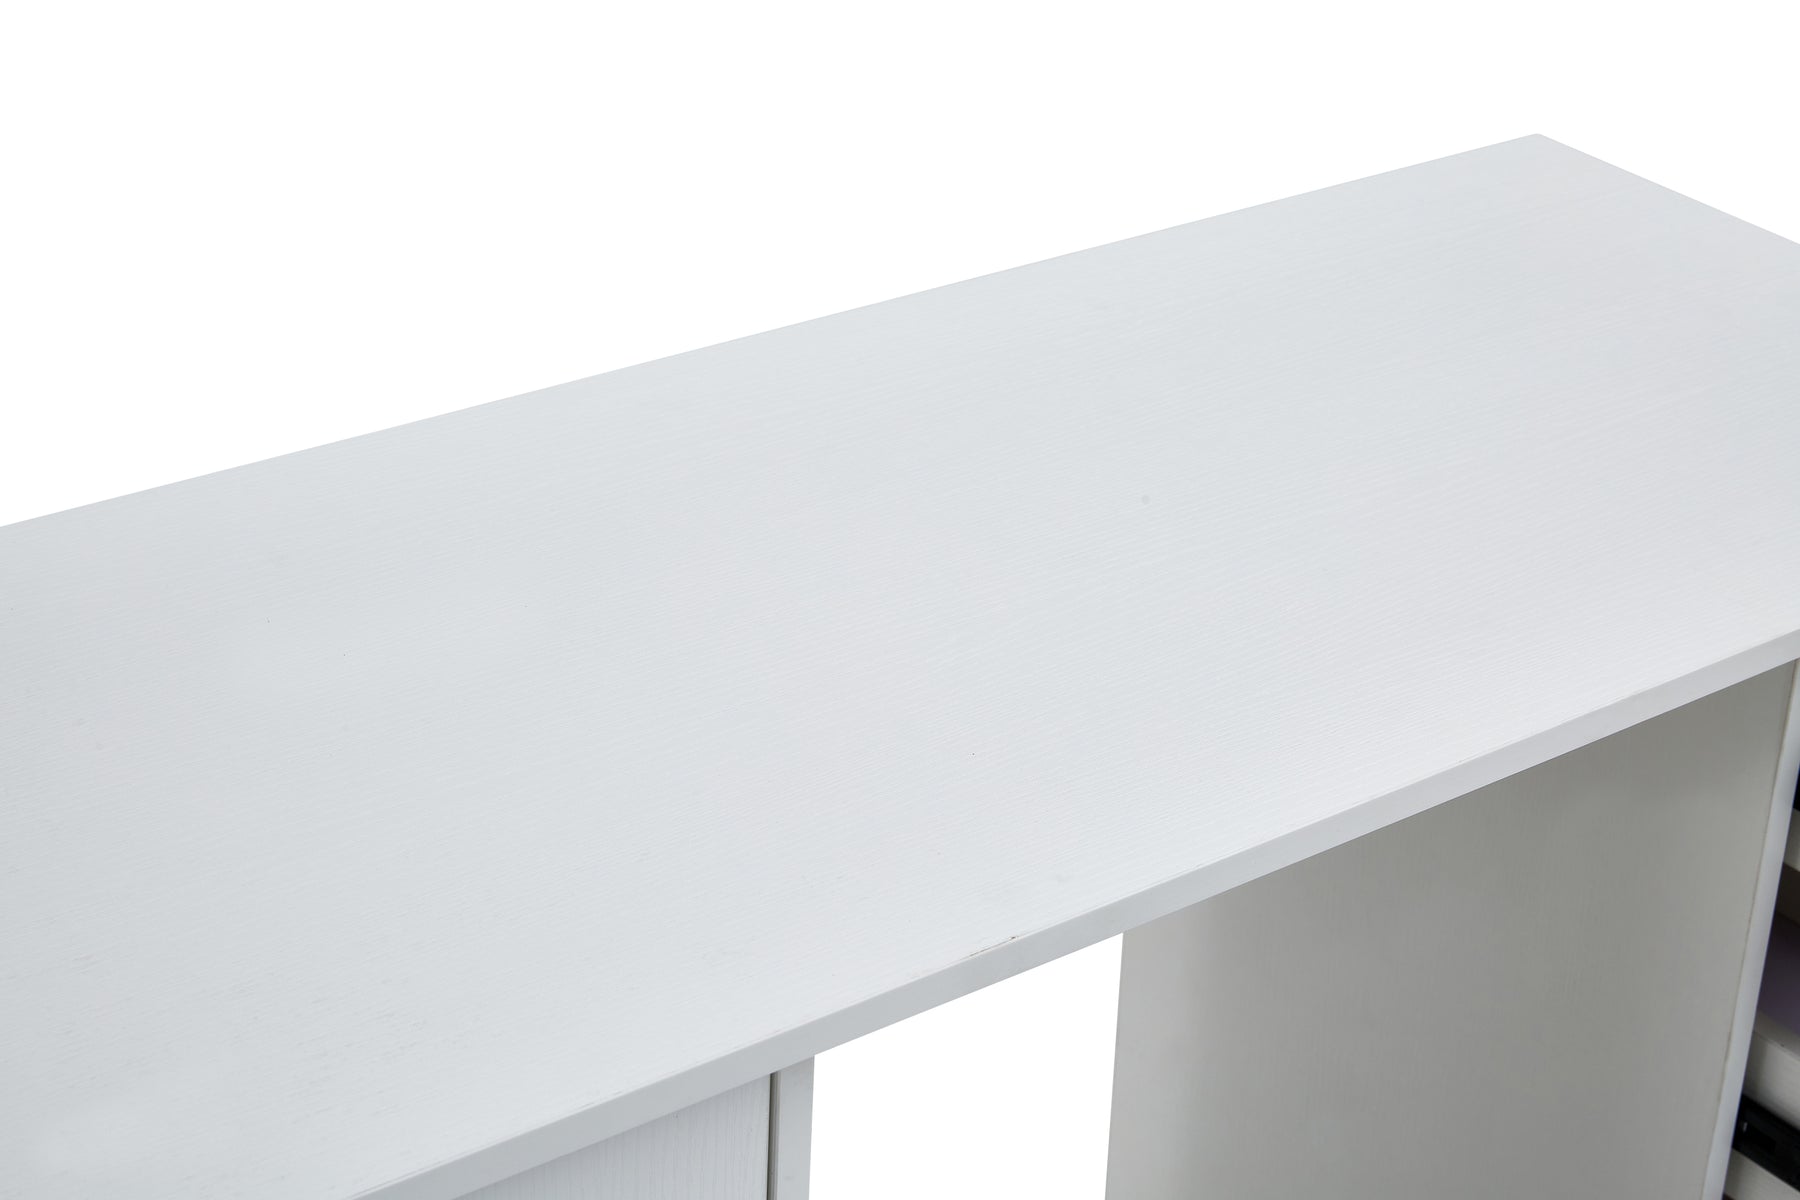 Home Office Computer Desk Table with Drawers White 41.73‘’L 17.72 - Tonkn - TonknW 31.5 - Tonkn - TonknH - Tonkn